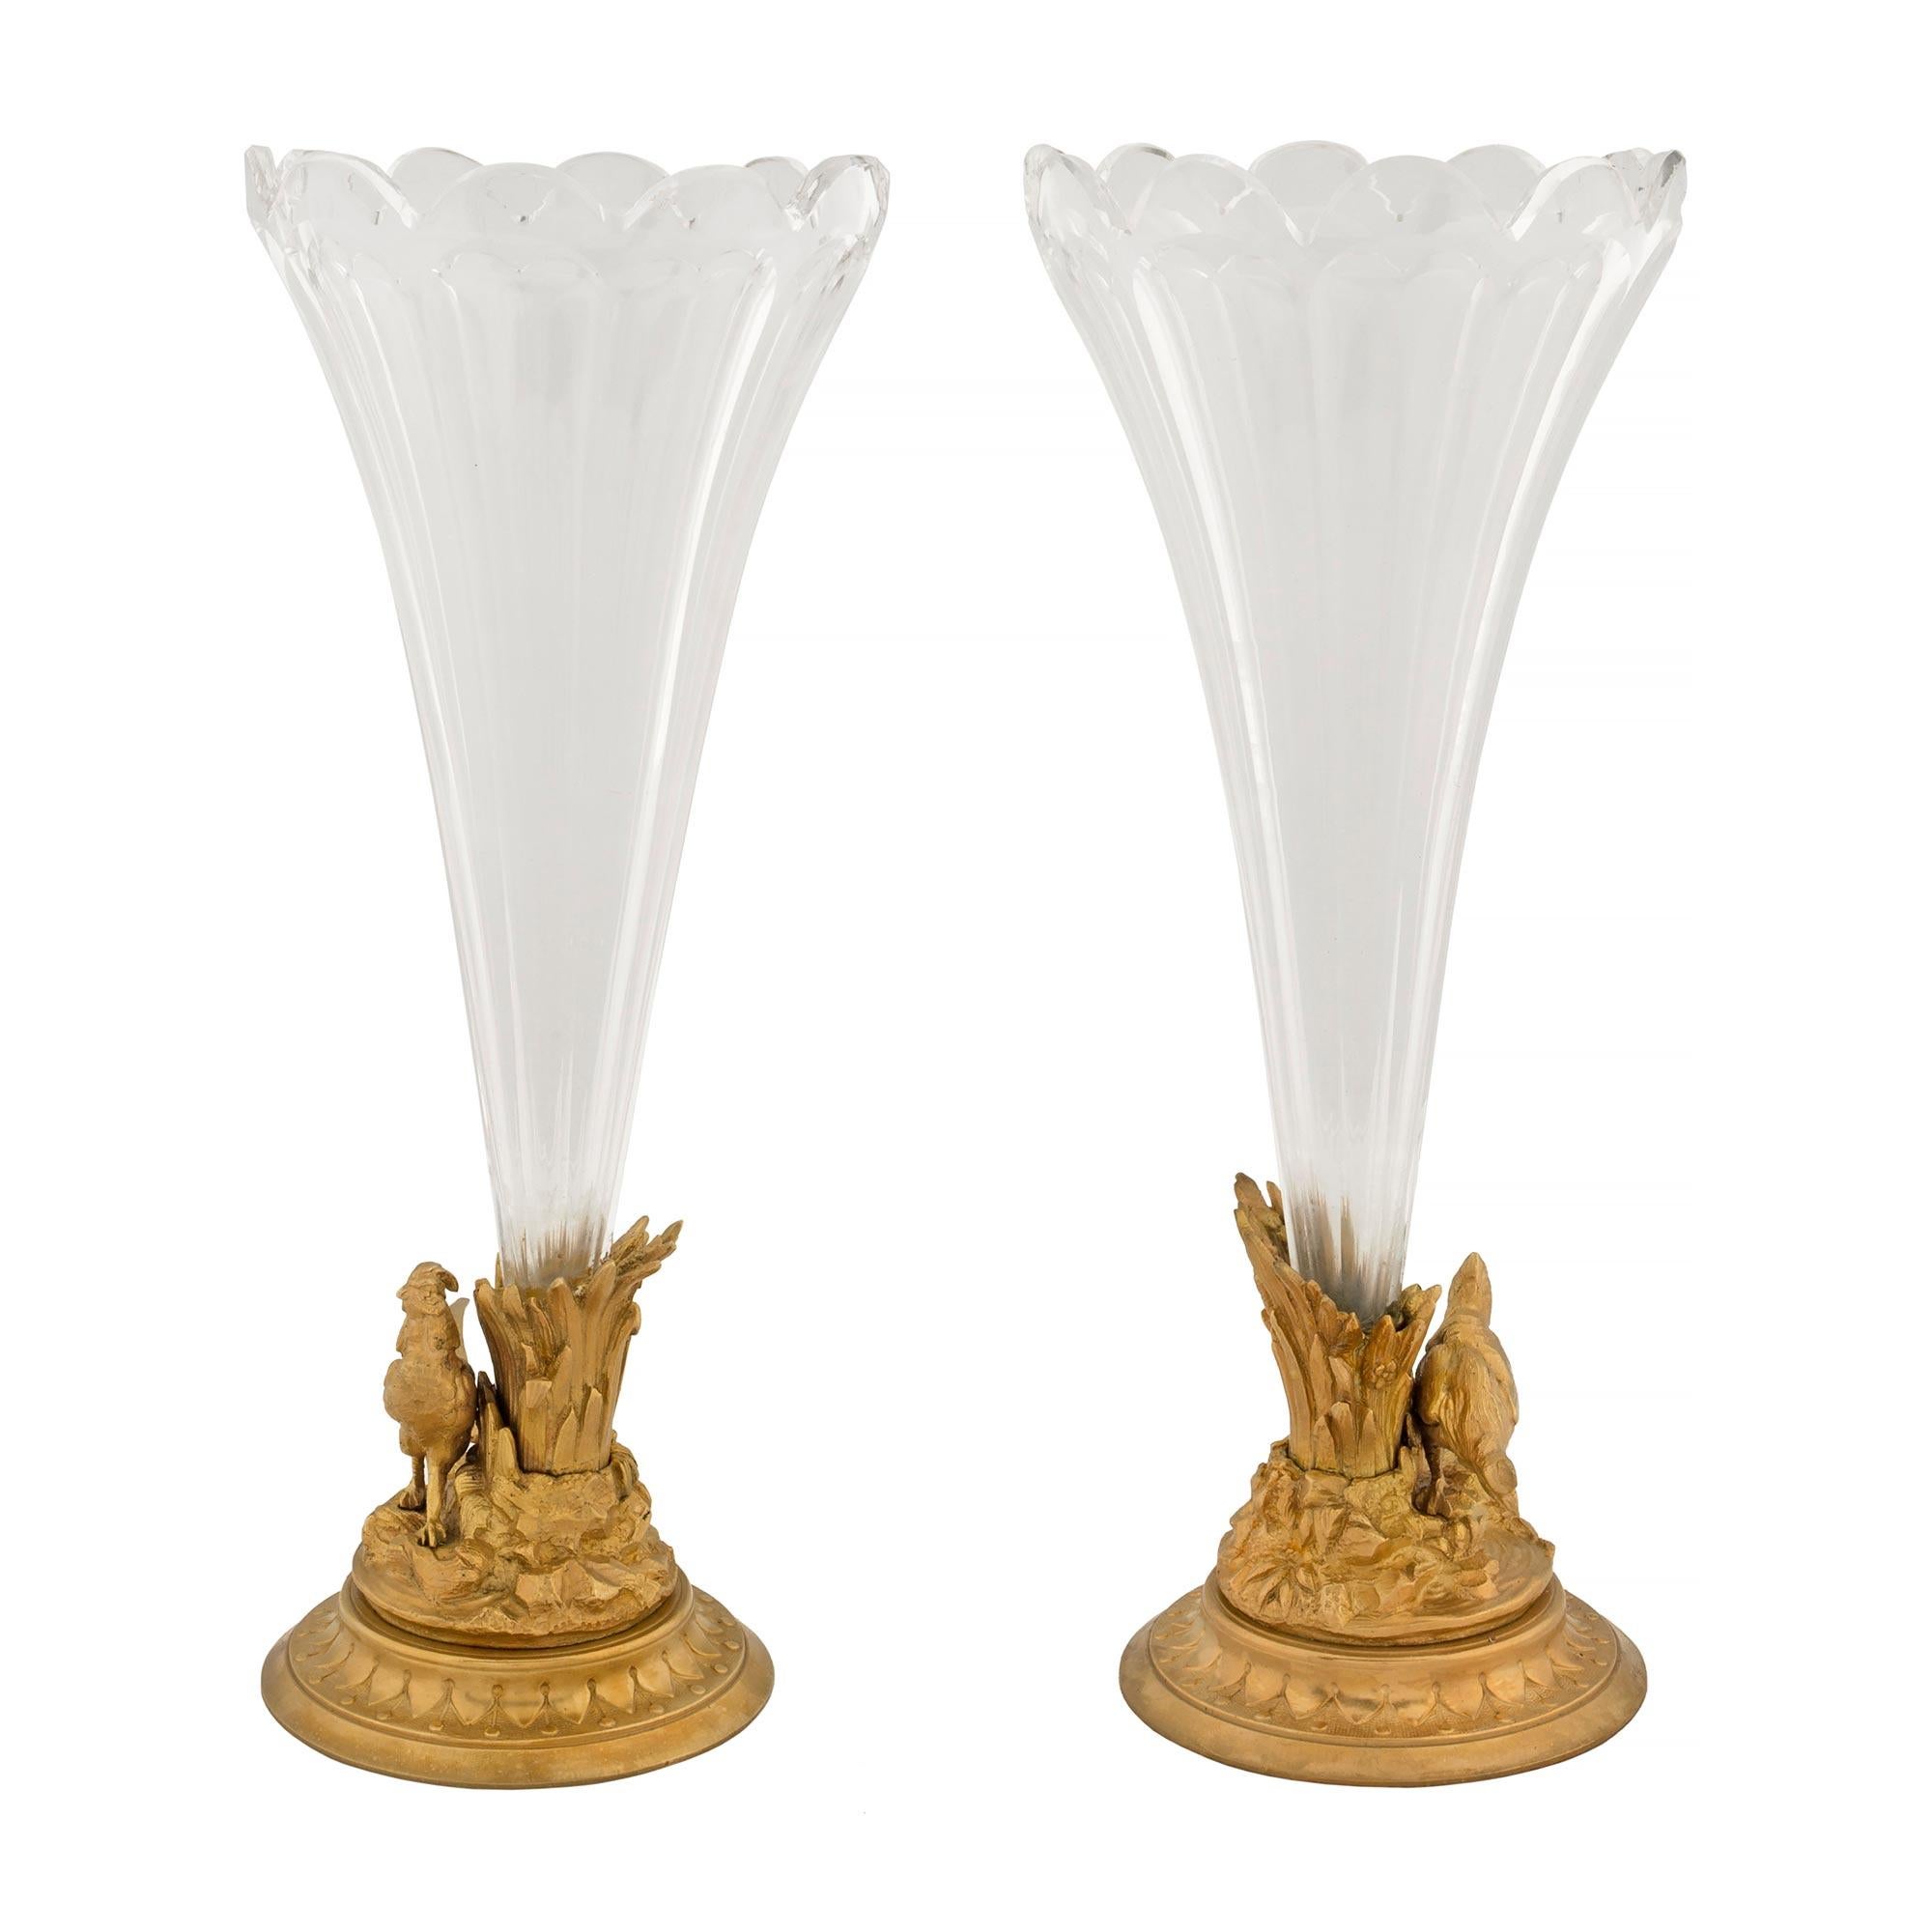 True Pair of French 19th Century Louis XVI St. Baccarat Crystal and Ormolu Vases In Good Condition For Sale In West Palm Beach, FL